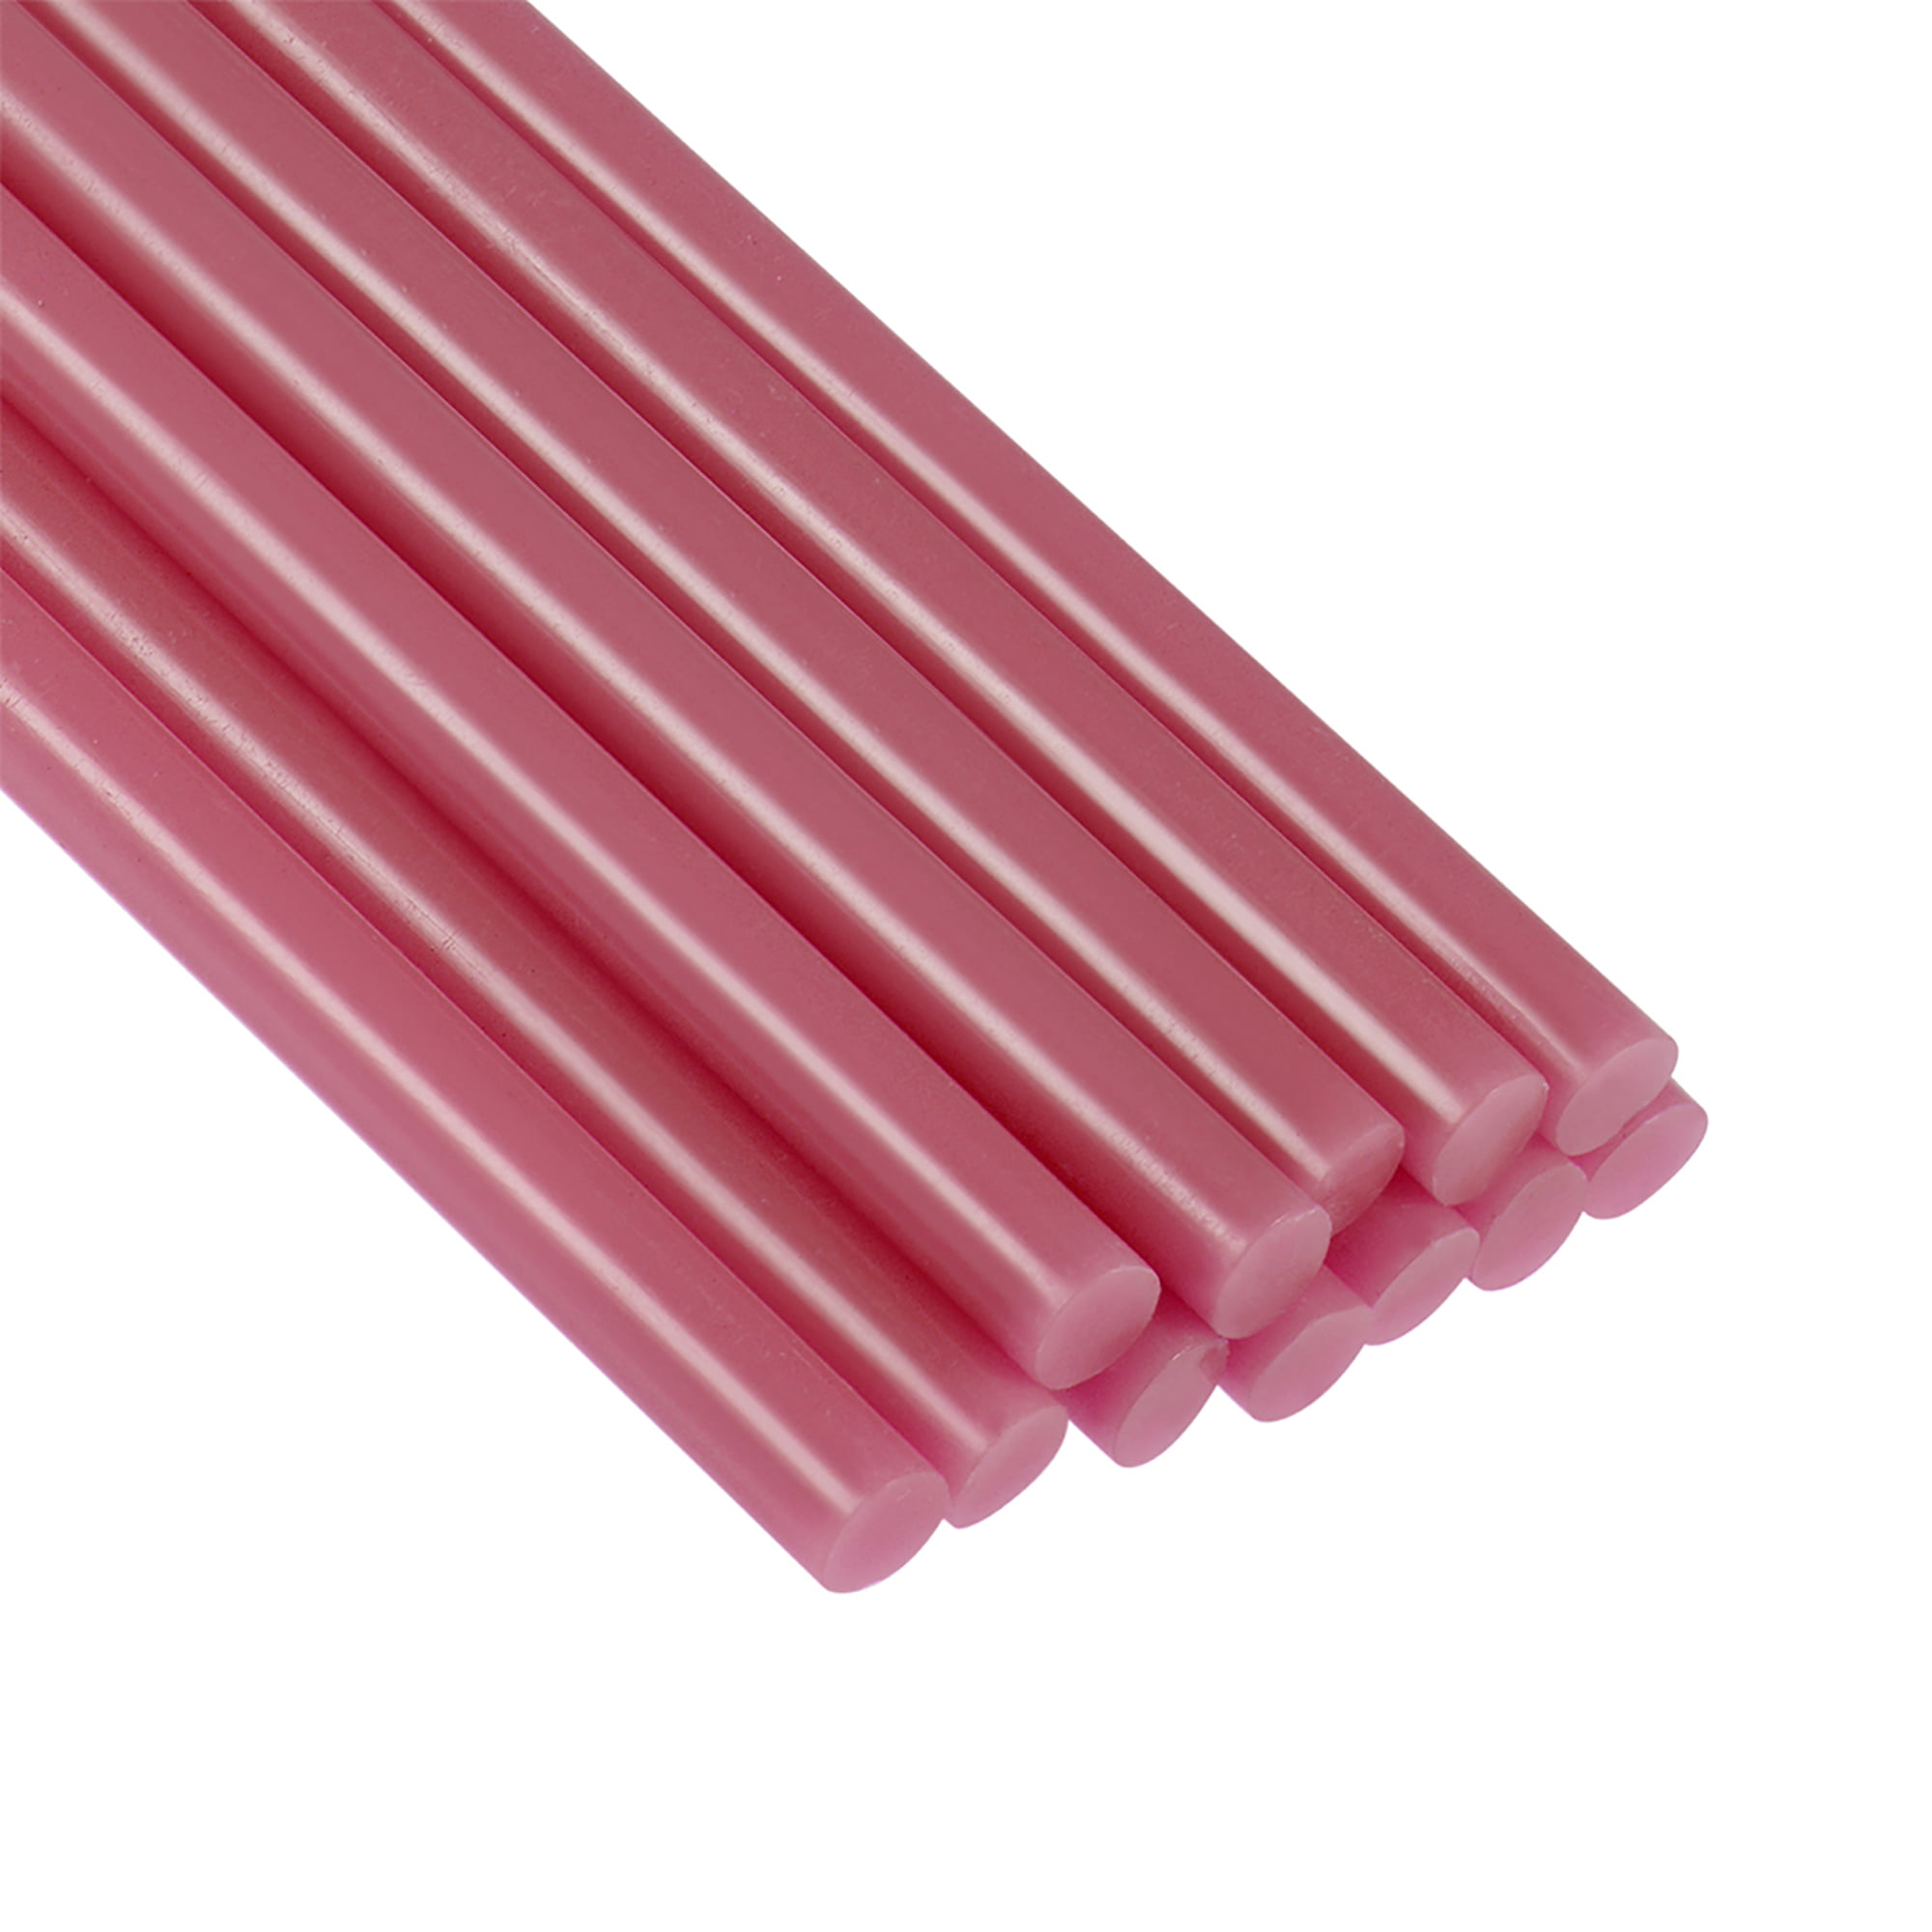 Pink Hot Glue Sticks diameter: 0.3 in / 7mm, Length 4 in Kits From